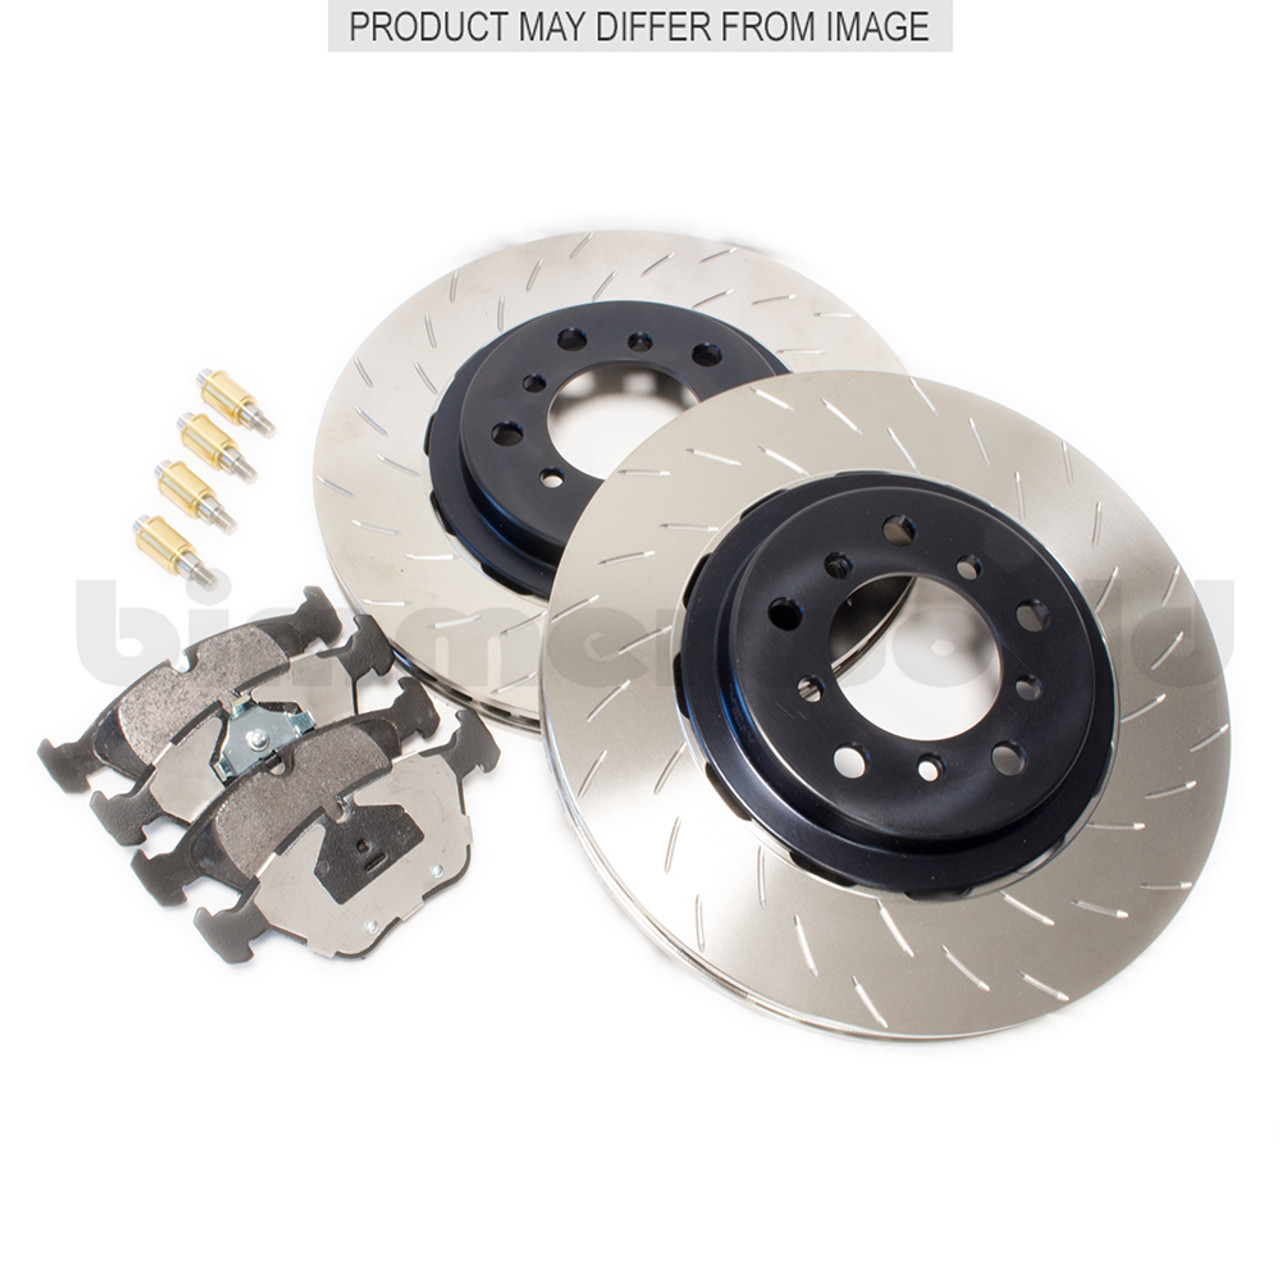 PFC E46 M3 CSL/ZCP Front Brake Package - 08 Compound